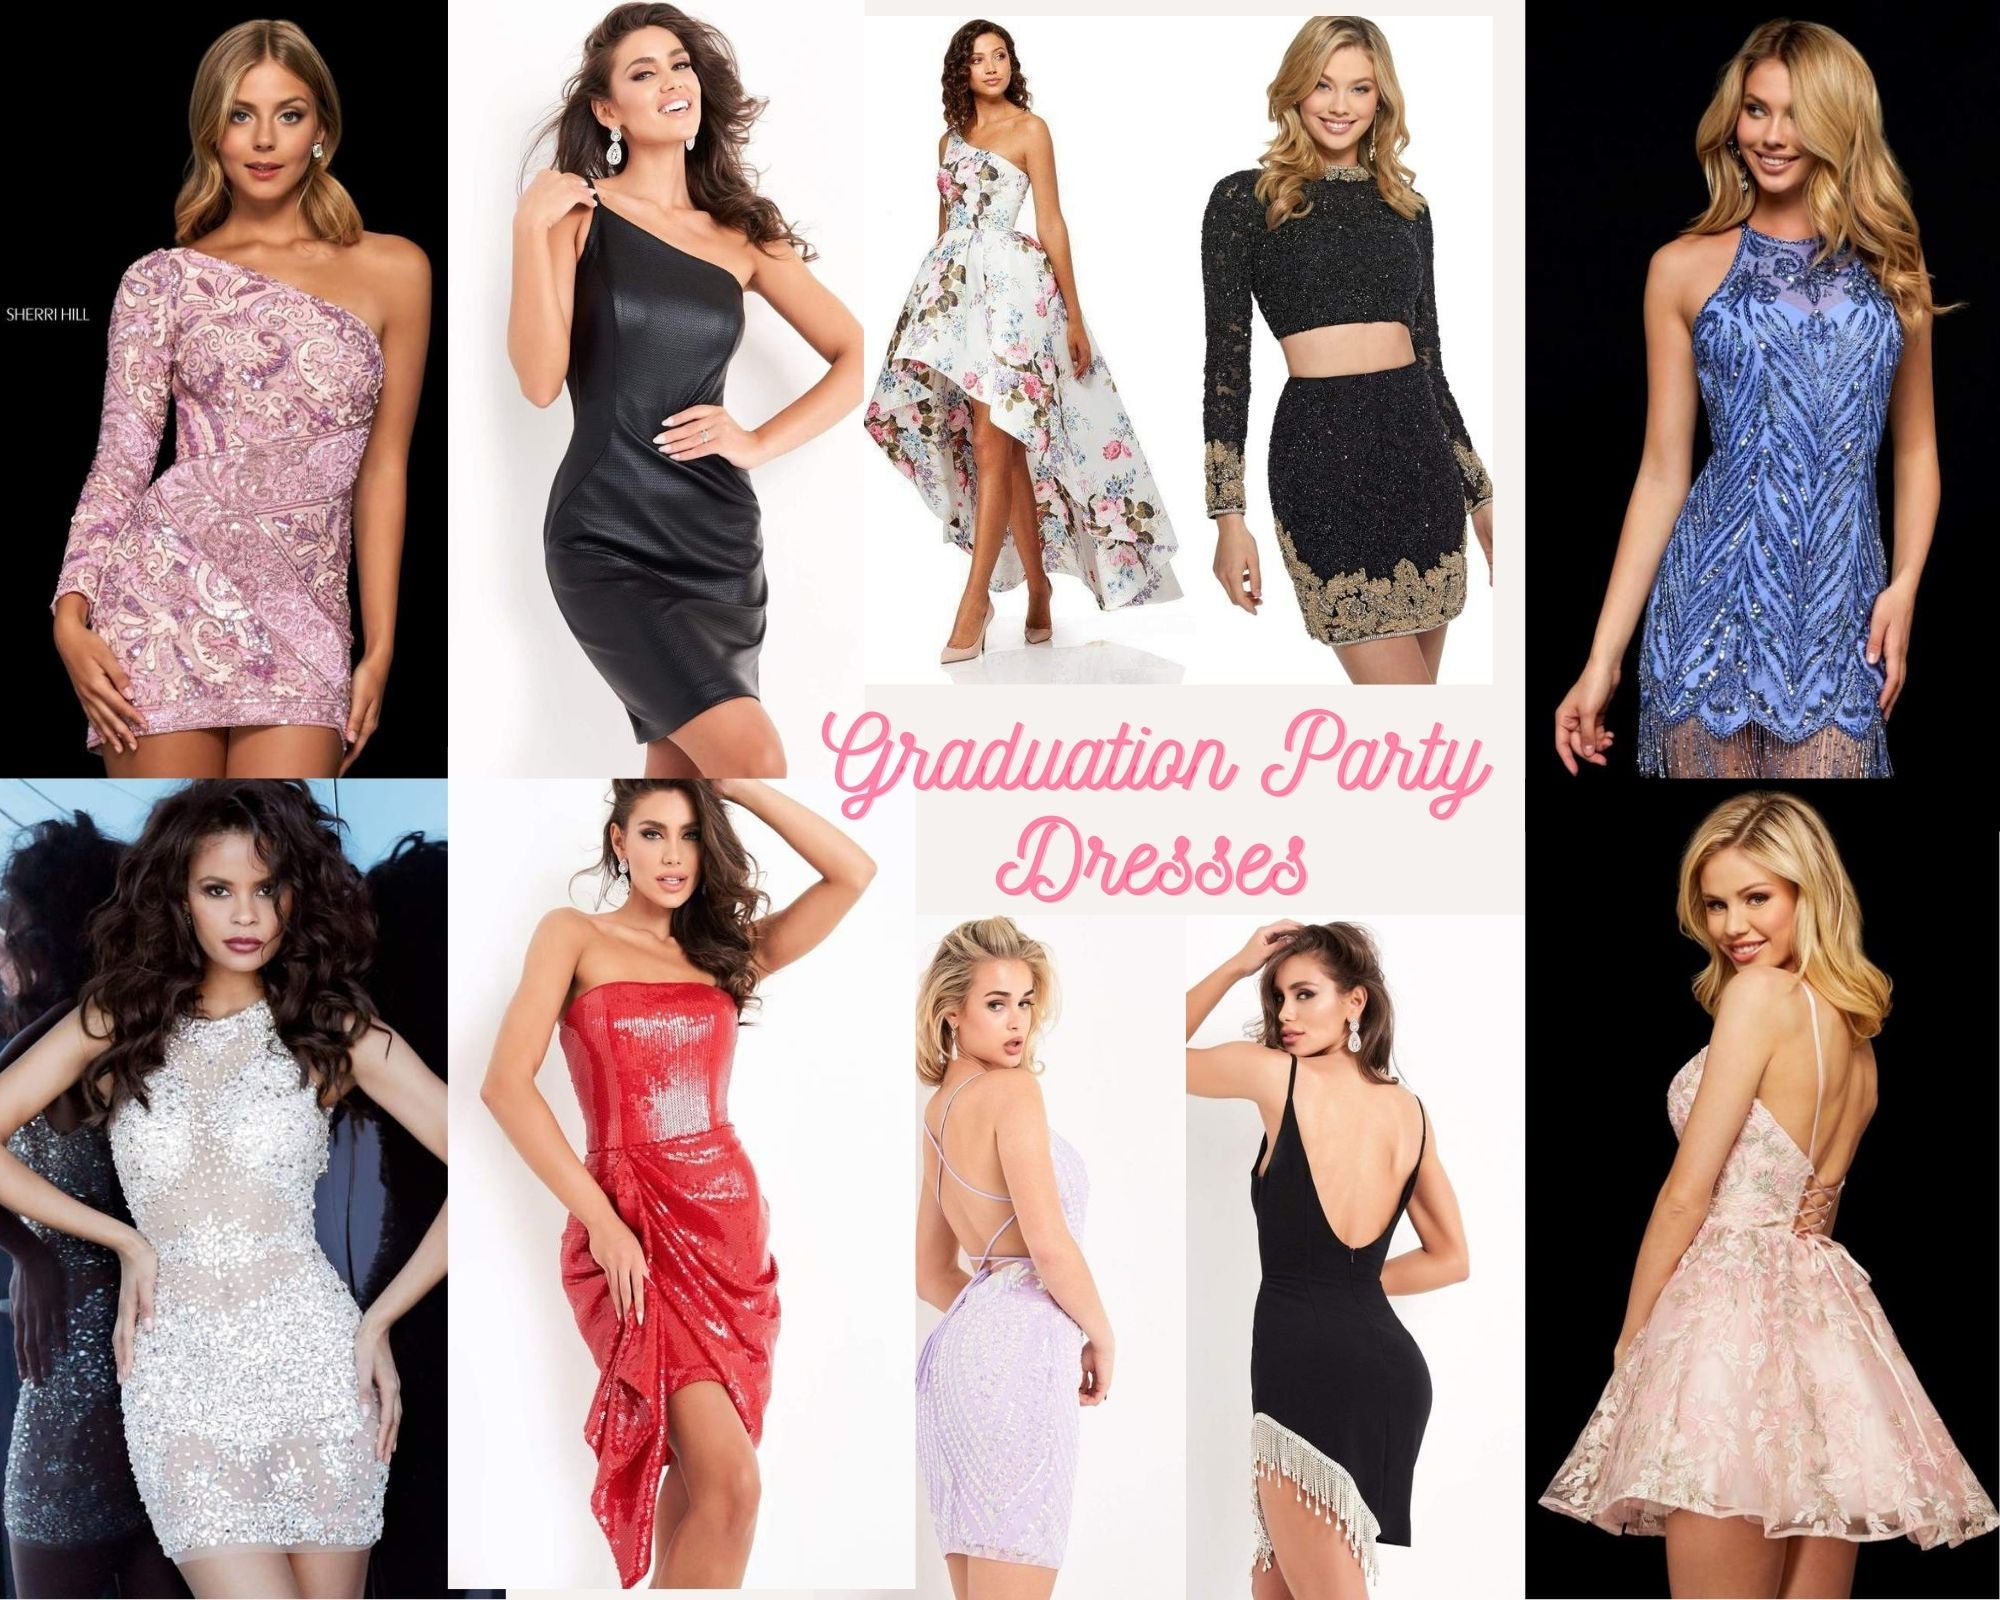 The Graduation Glam! How To Find Your Perfect Graduation Dress